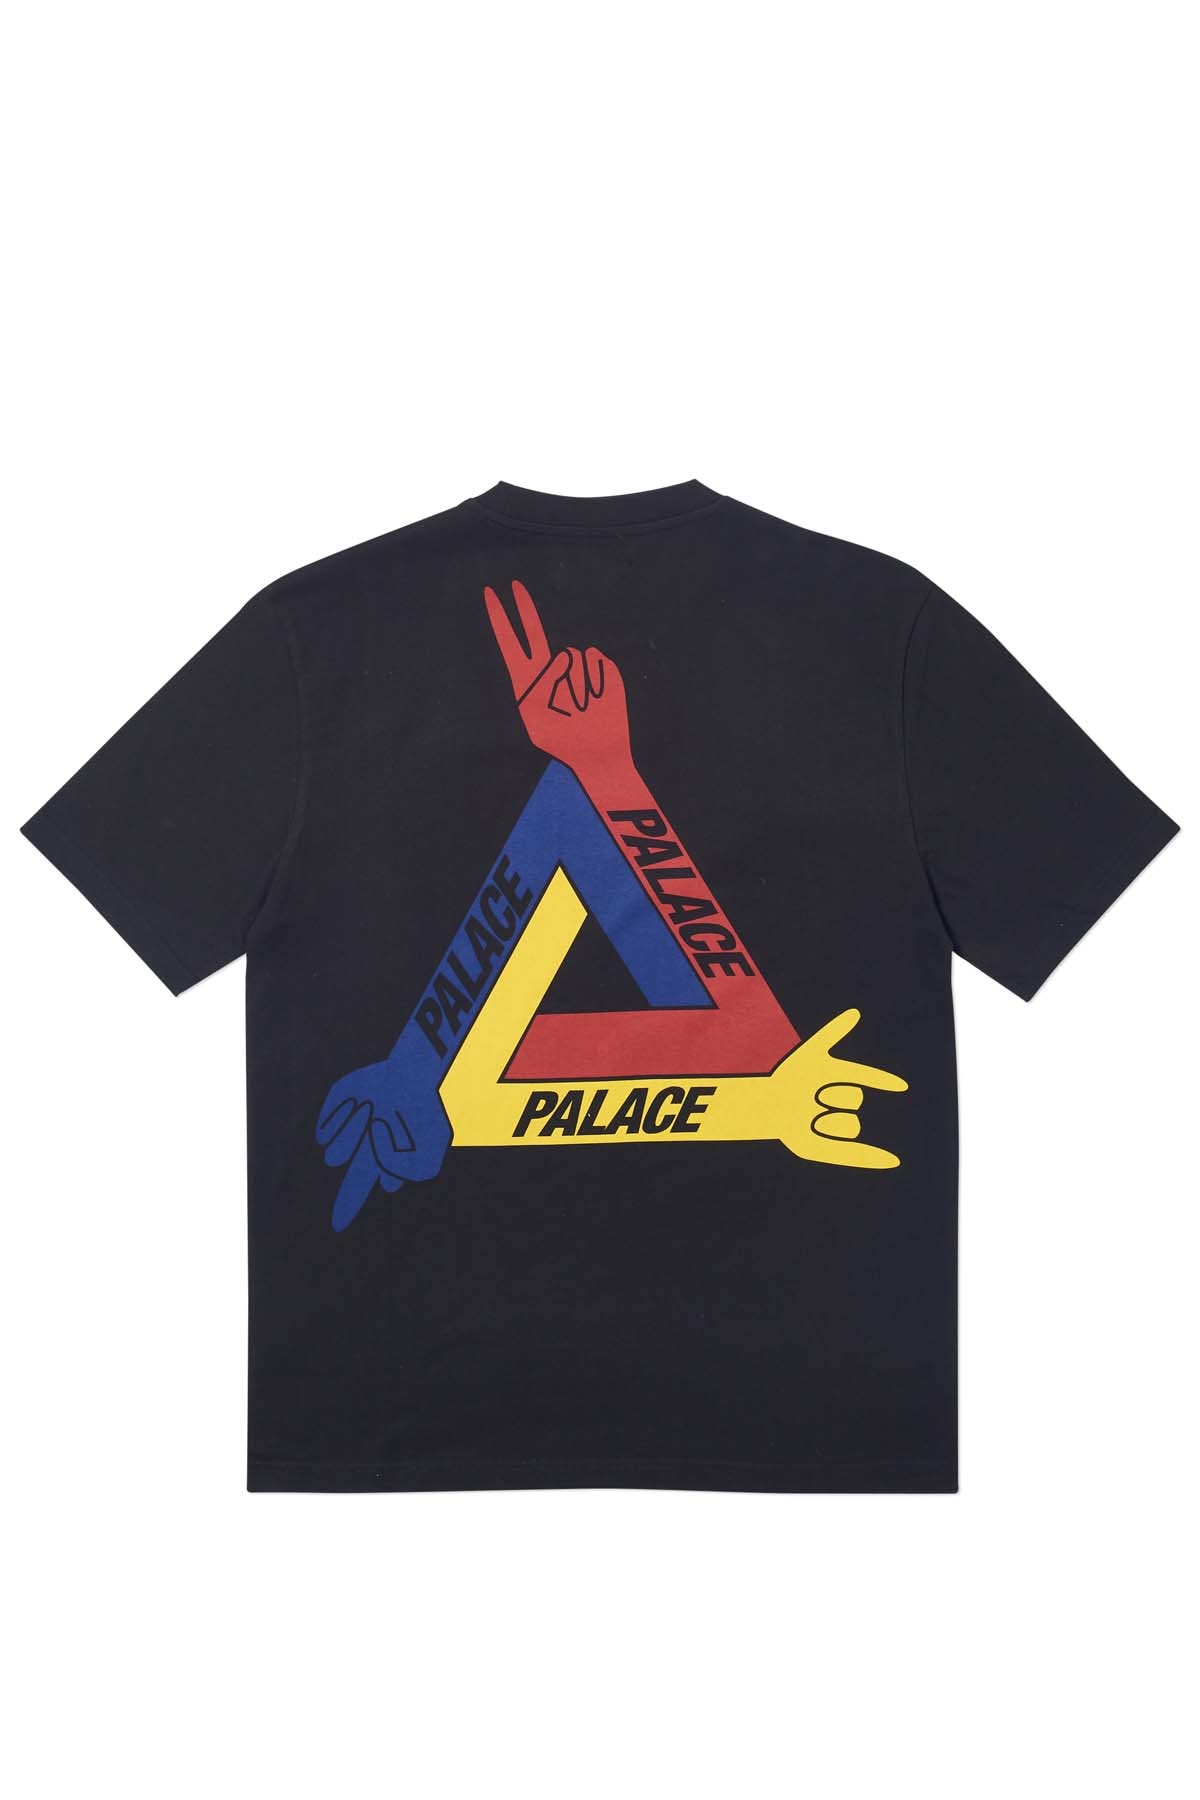 Palace Jean-Charles Castelbajc collection collaboration teaser video